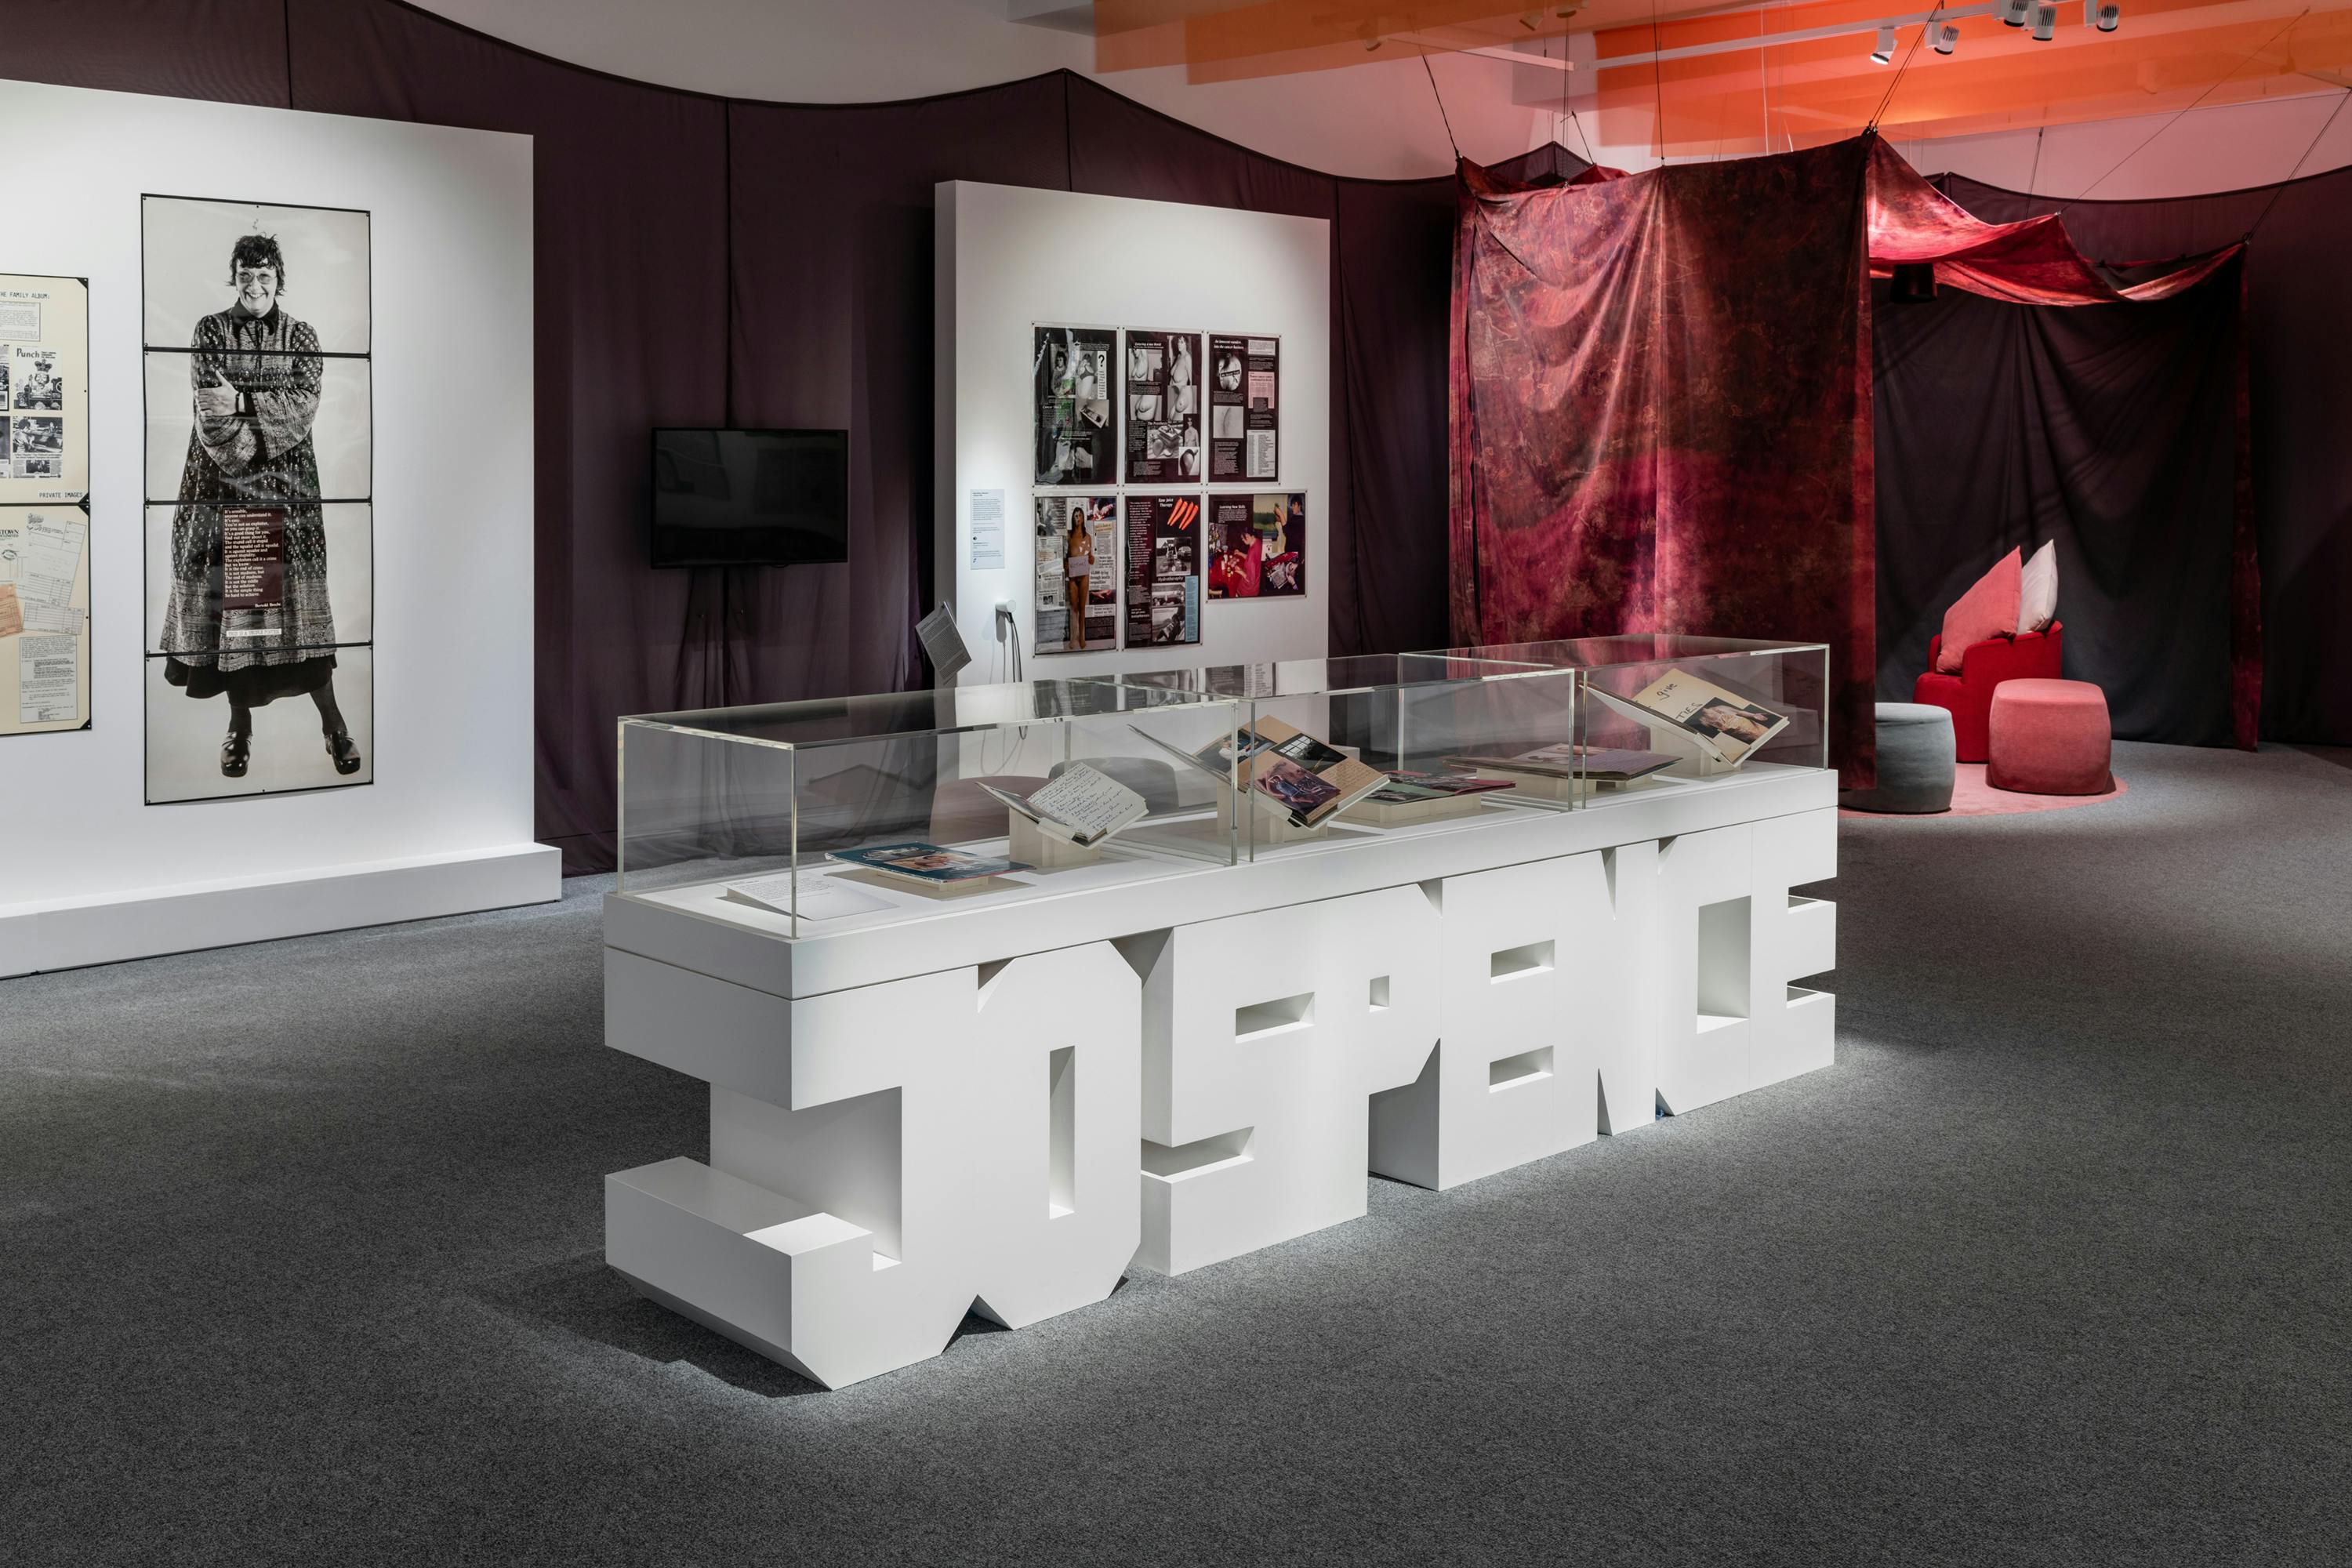 The installation includes large photographs and montages of Jo Spence on white walls. In the foreground of the image a vitrine is shaped in Jo Spence's name and contains notebooks and diaries. The gallery walls and ceiling are covered in peach coloured and dark brown fabrics creating a comforting environment.